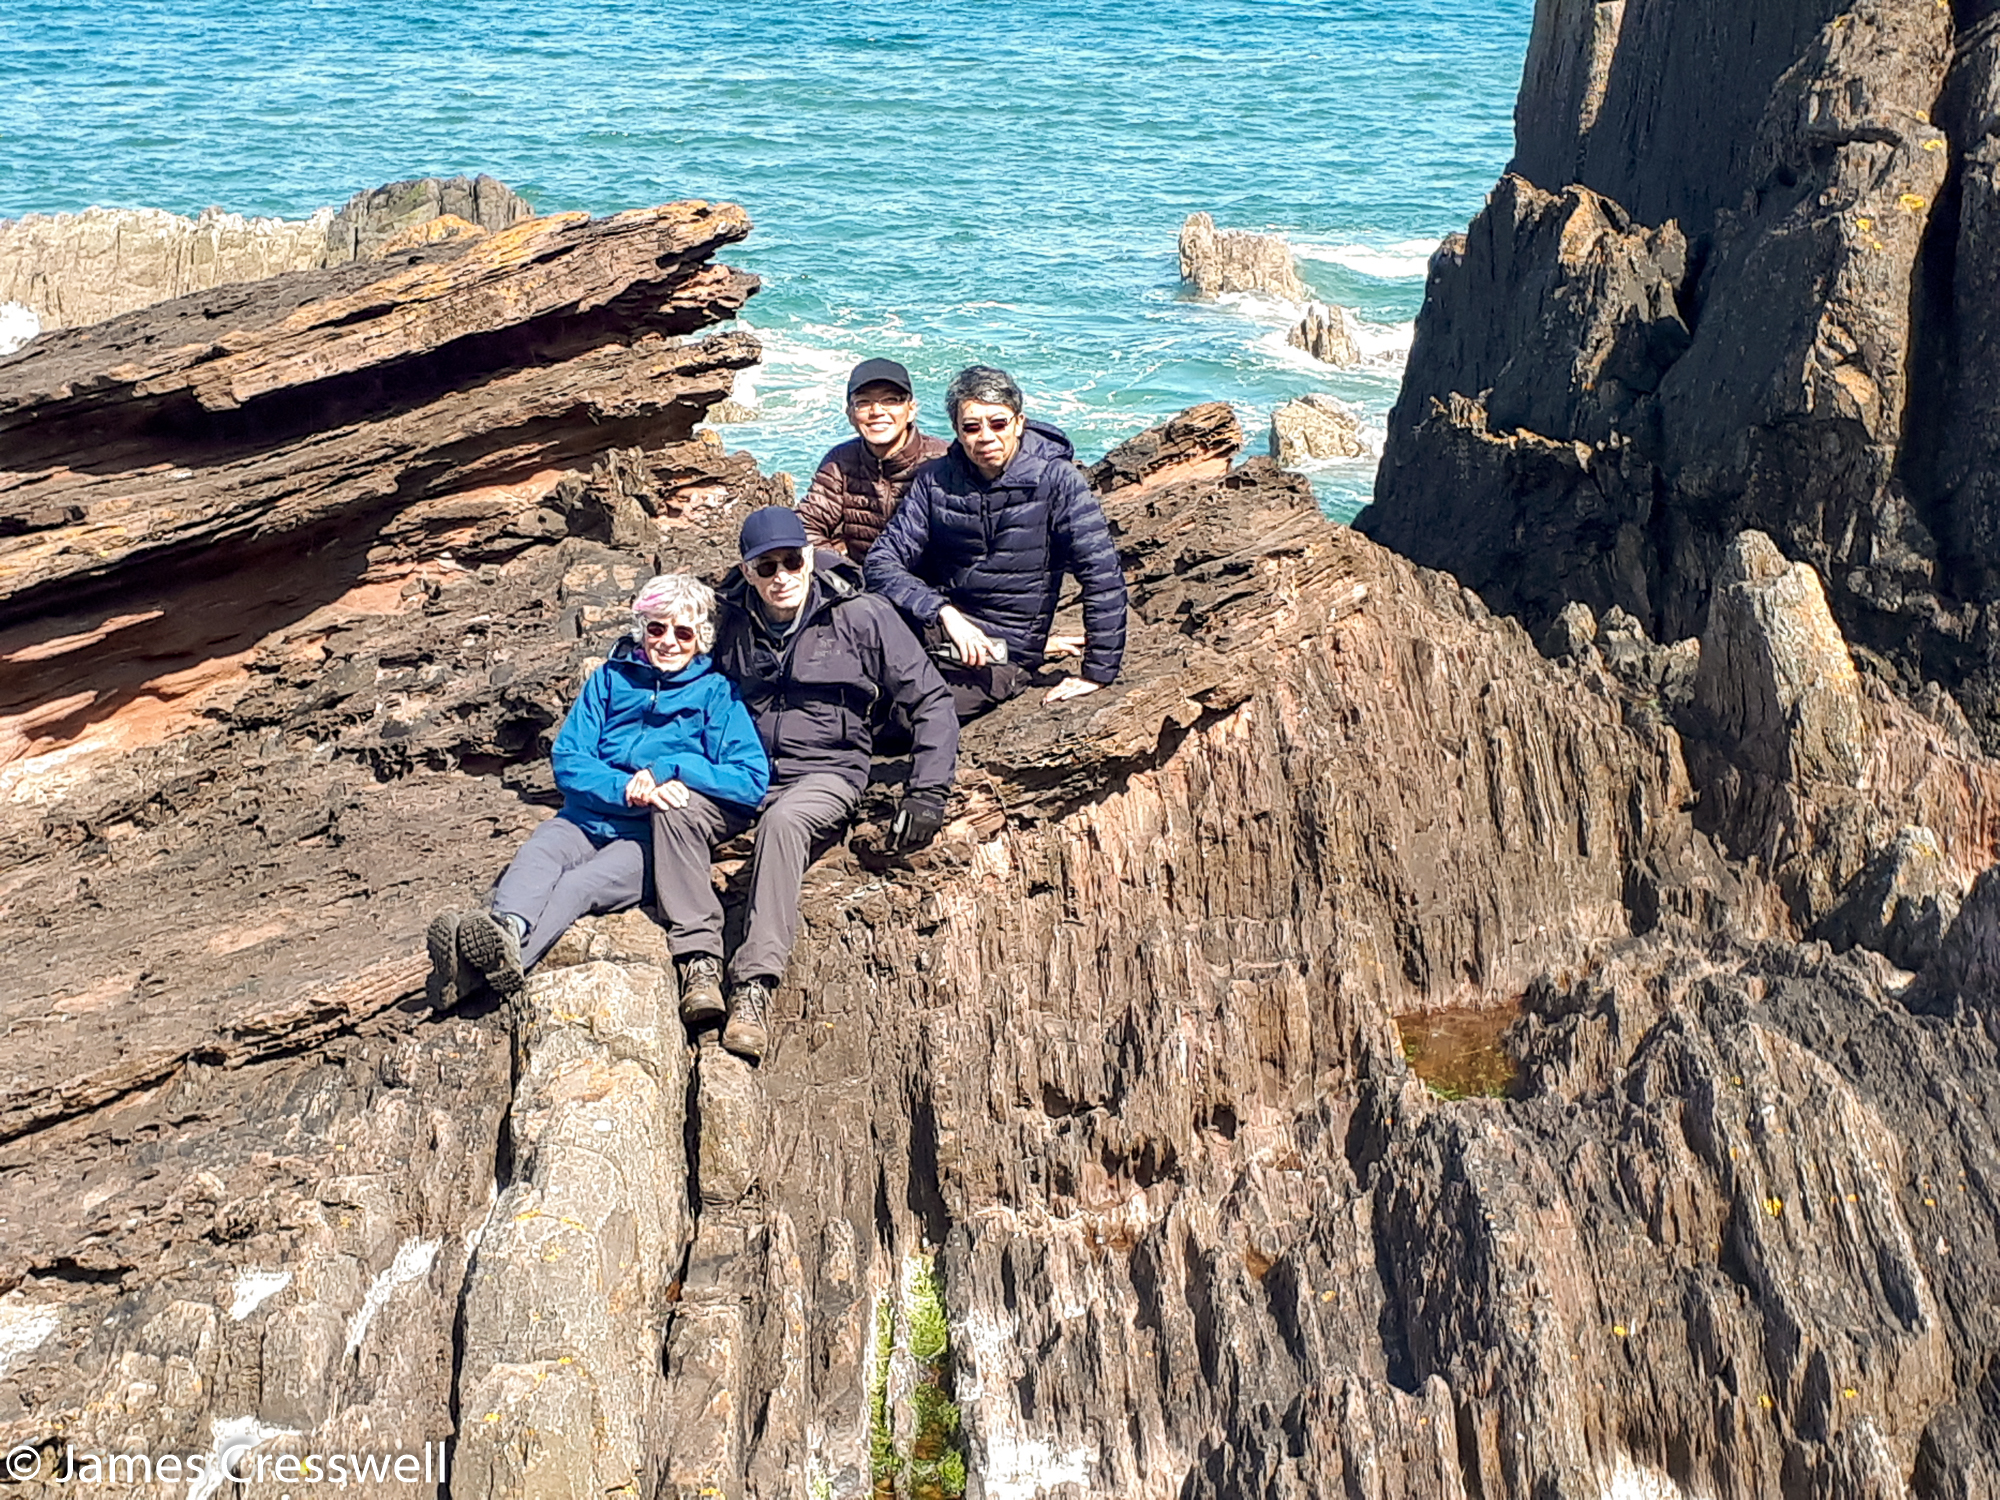 A photograph of four people sitting on a geological formation, Siccar Point, taken on a GeoWorld Travel Scotland geology trip, tour and holiday